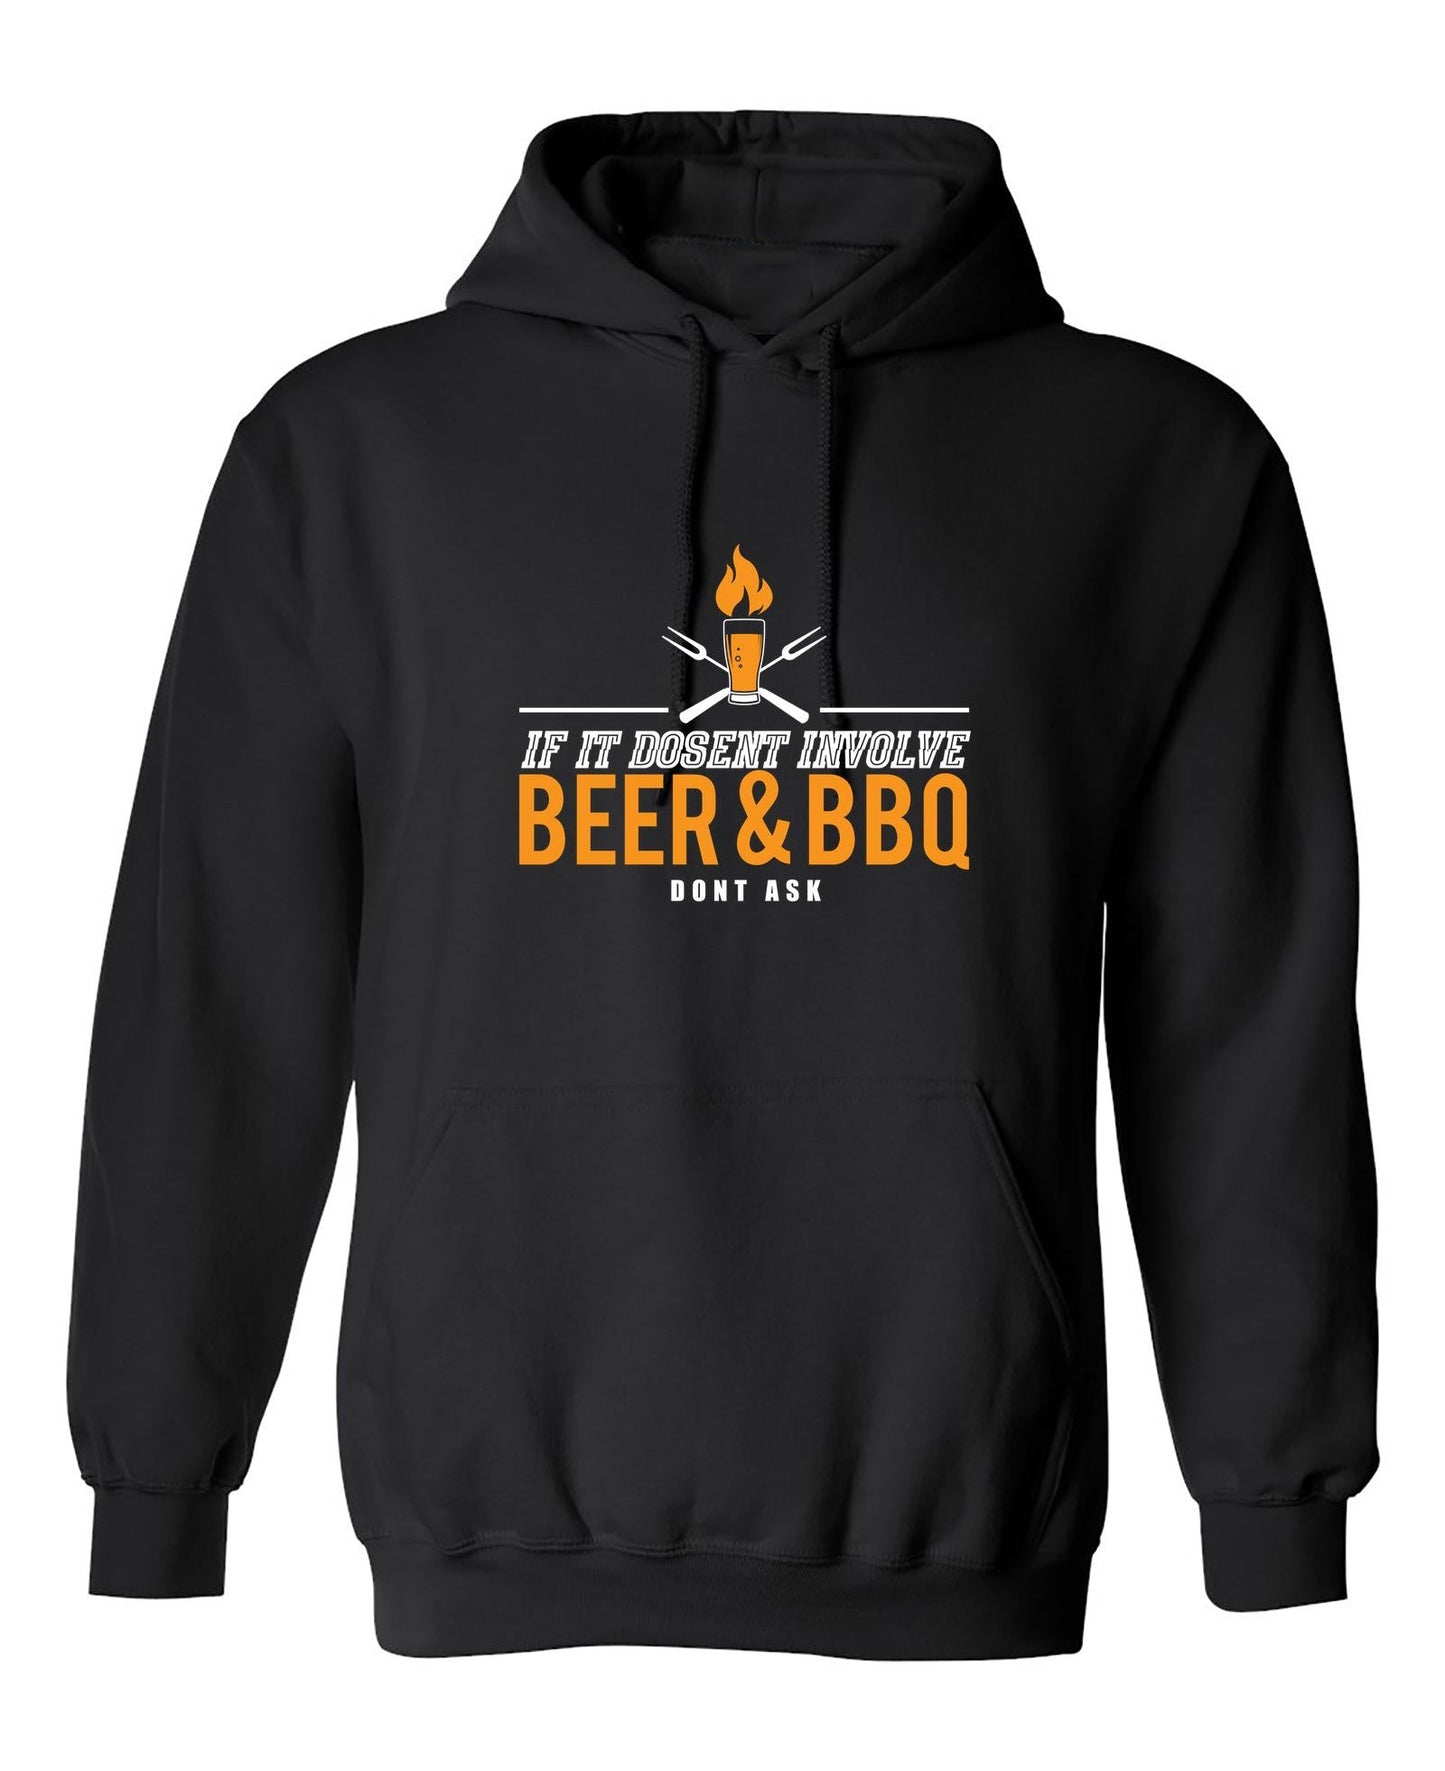 Funny T-Shirts design "If It Doesn't Involve Beer and BBQ, Don't Ask"